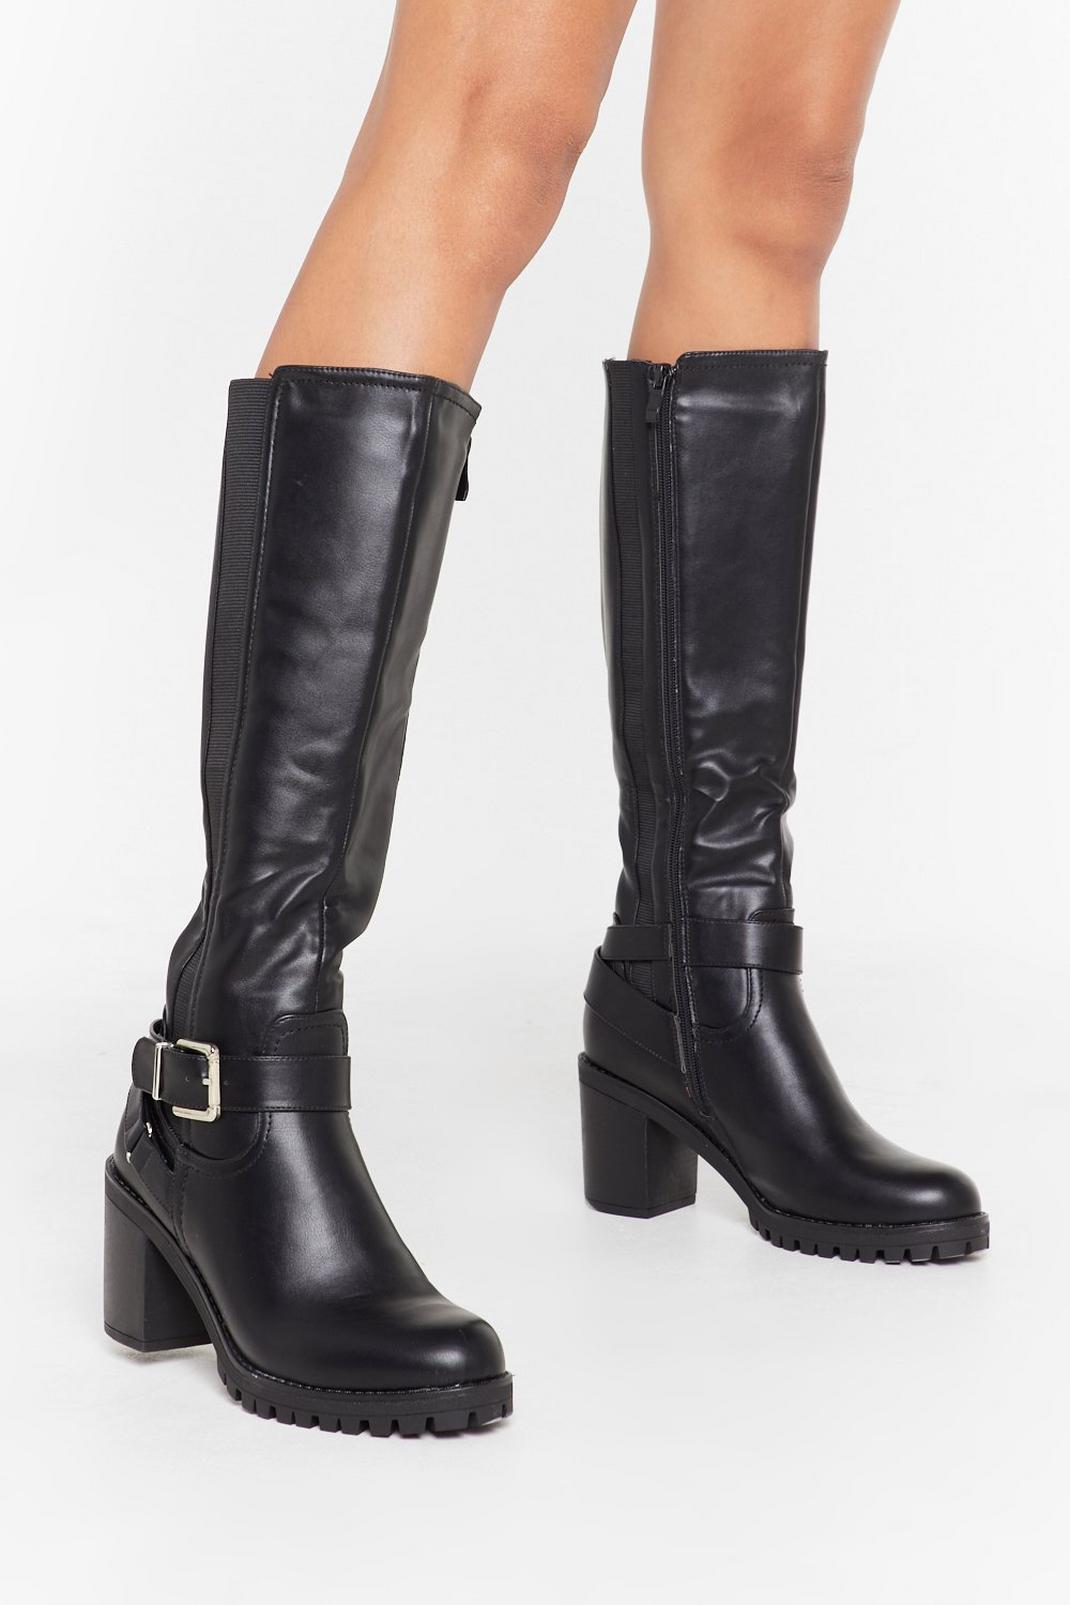 We Don't Give a Buck-le Faux Leather Knee-High Boots | Nasty Gal